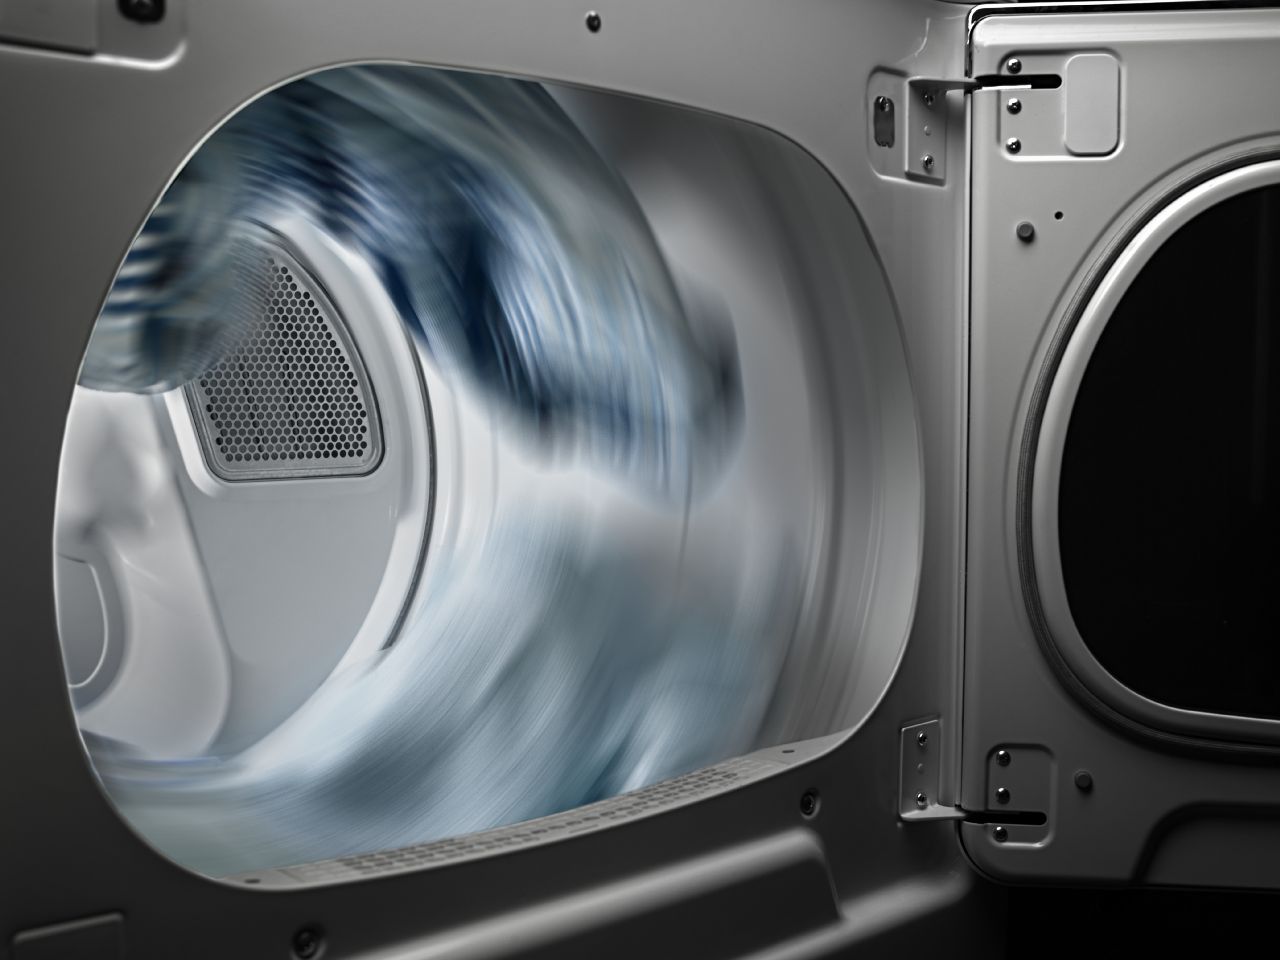 How To Fix The Error Code Db For GE Dryer